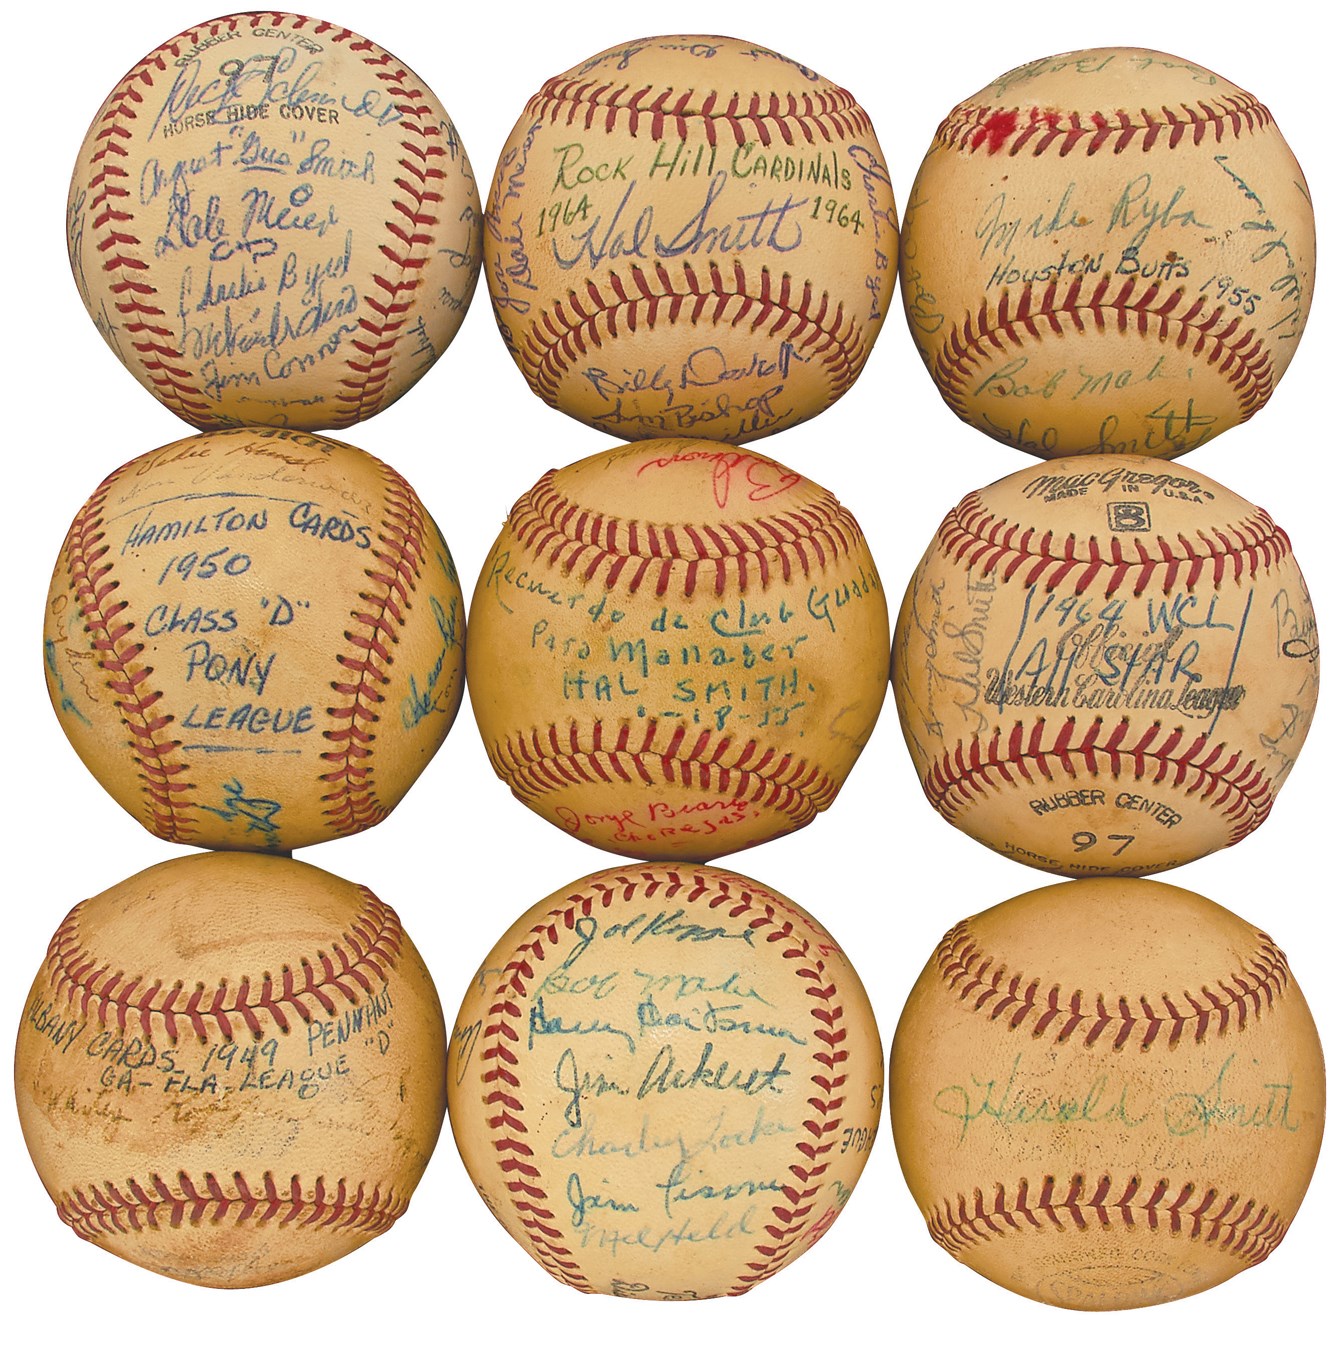 - Rare Minors & Mexican League Team-Signed Baseballs from MLer Hal R. Smith (9)